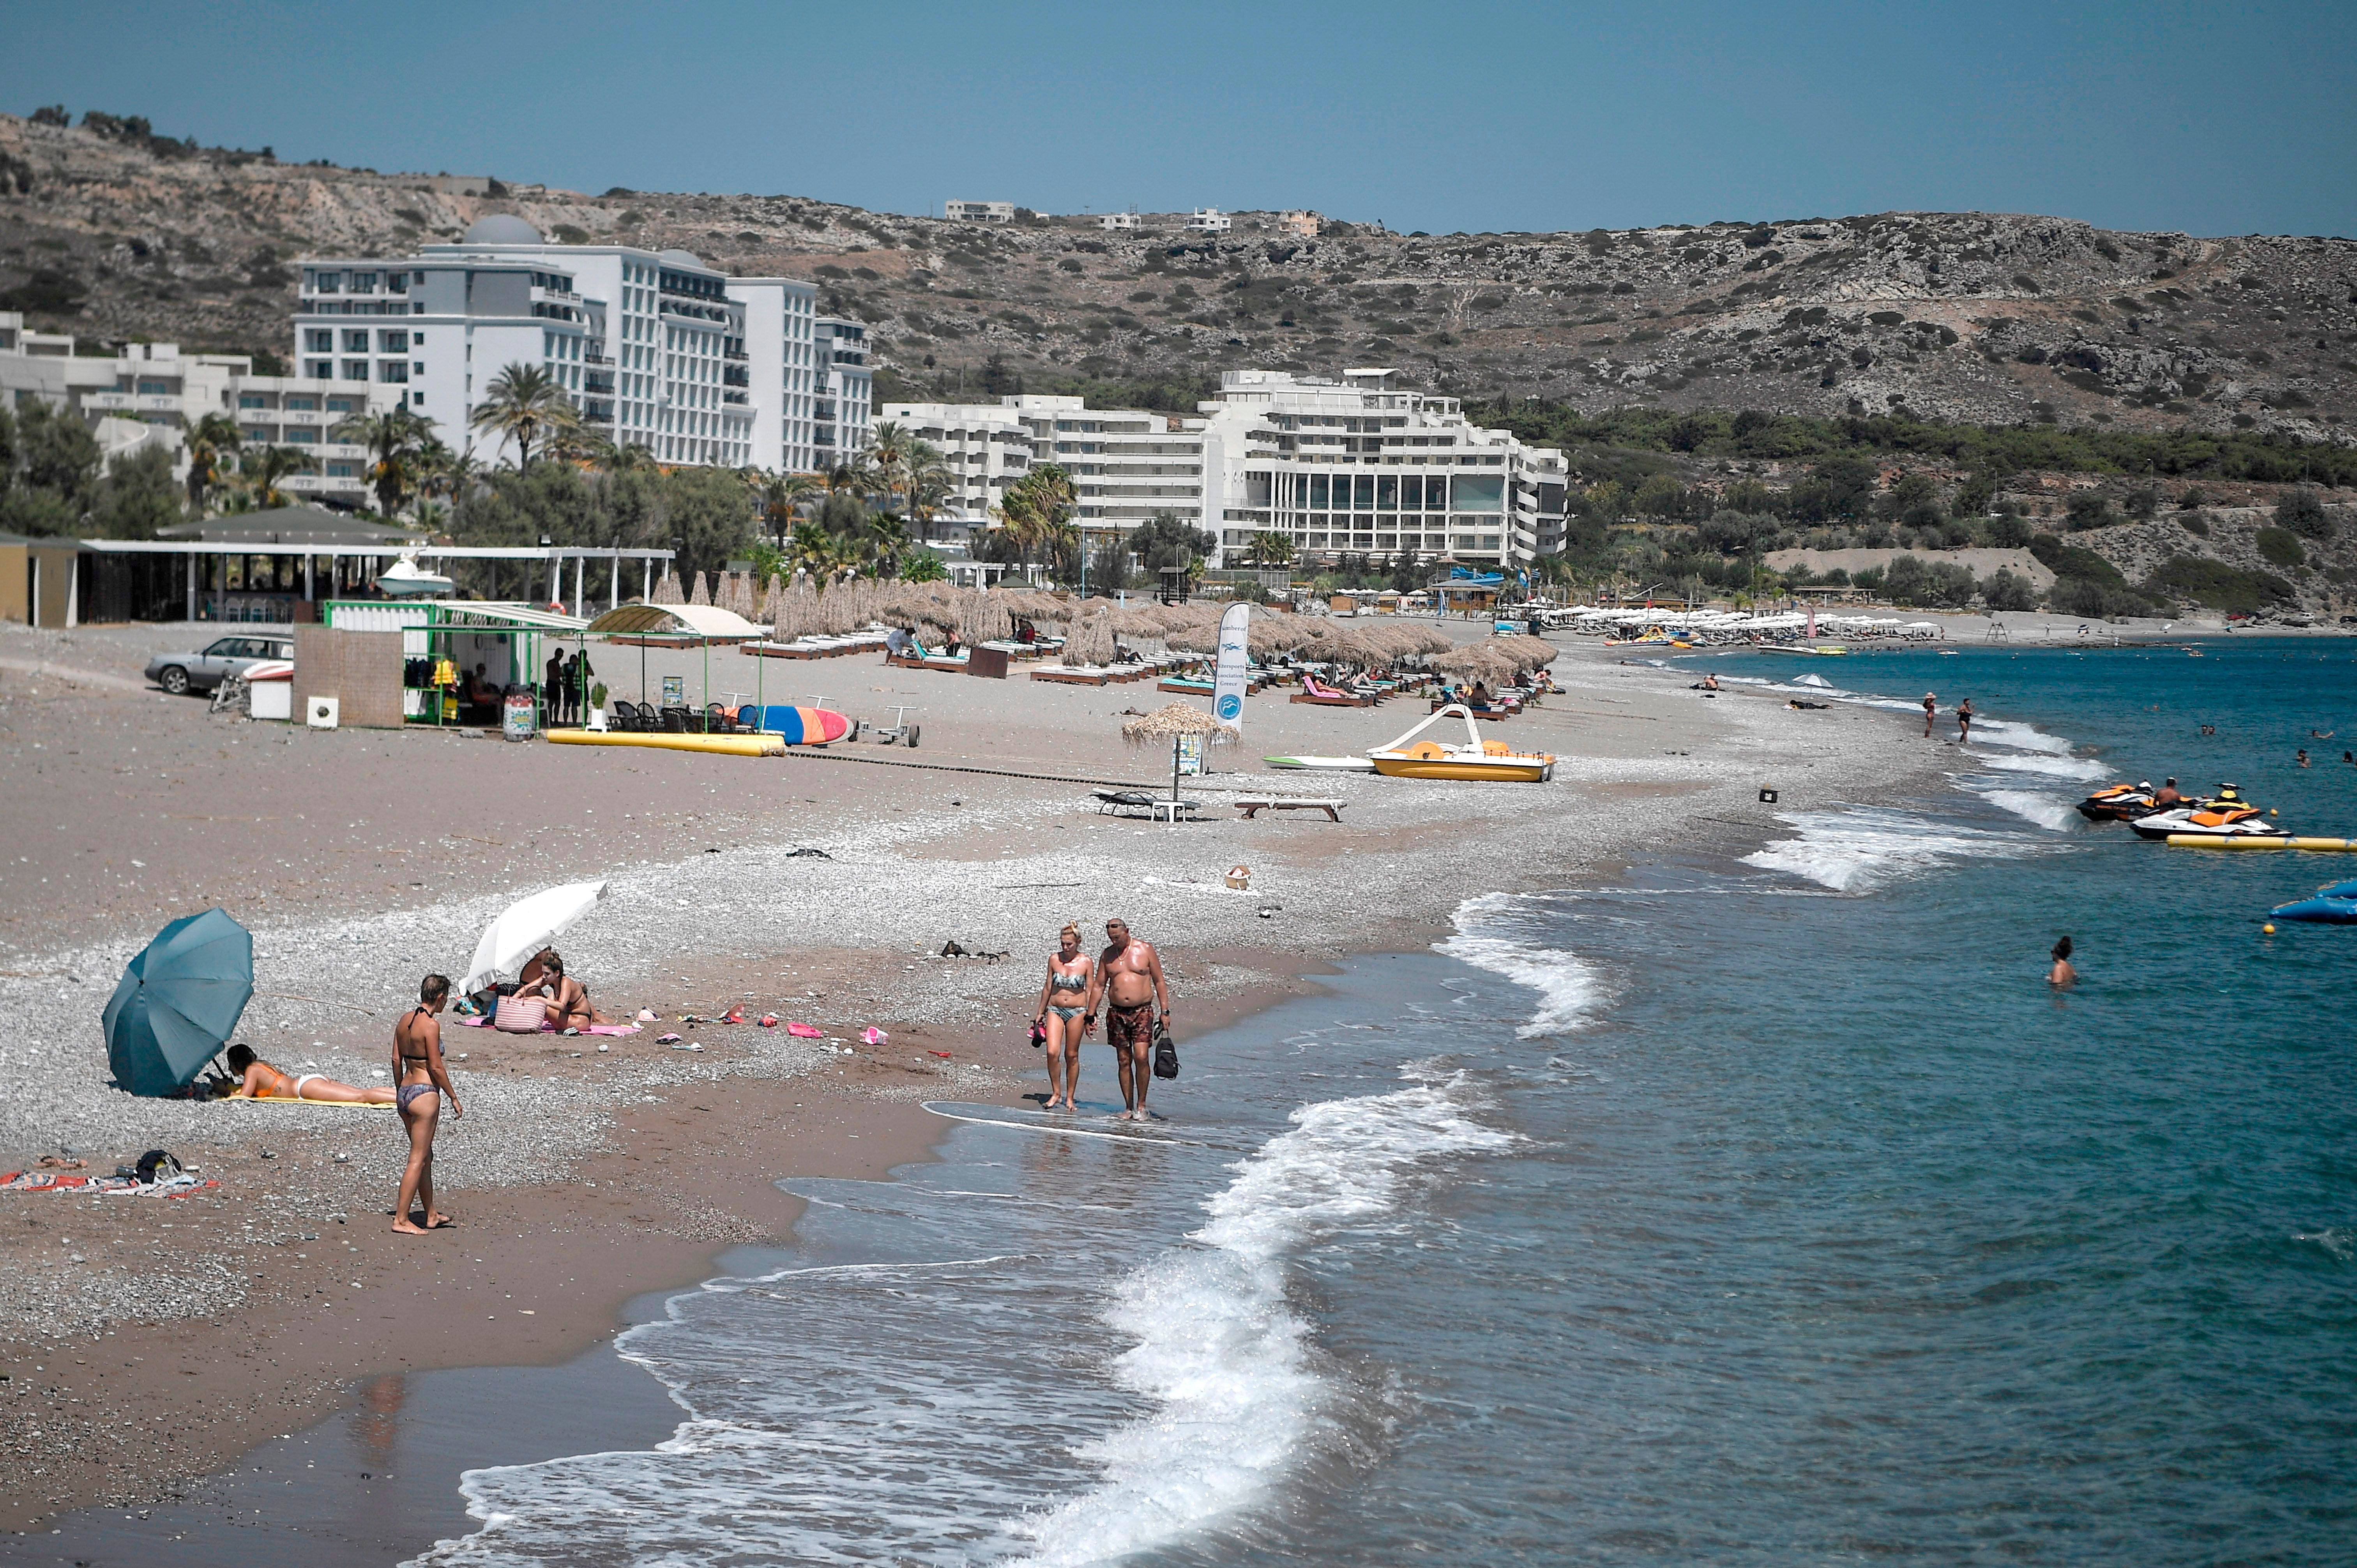 It could cost more than £230 to fly back from Rhodes after the airlines end their summer season